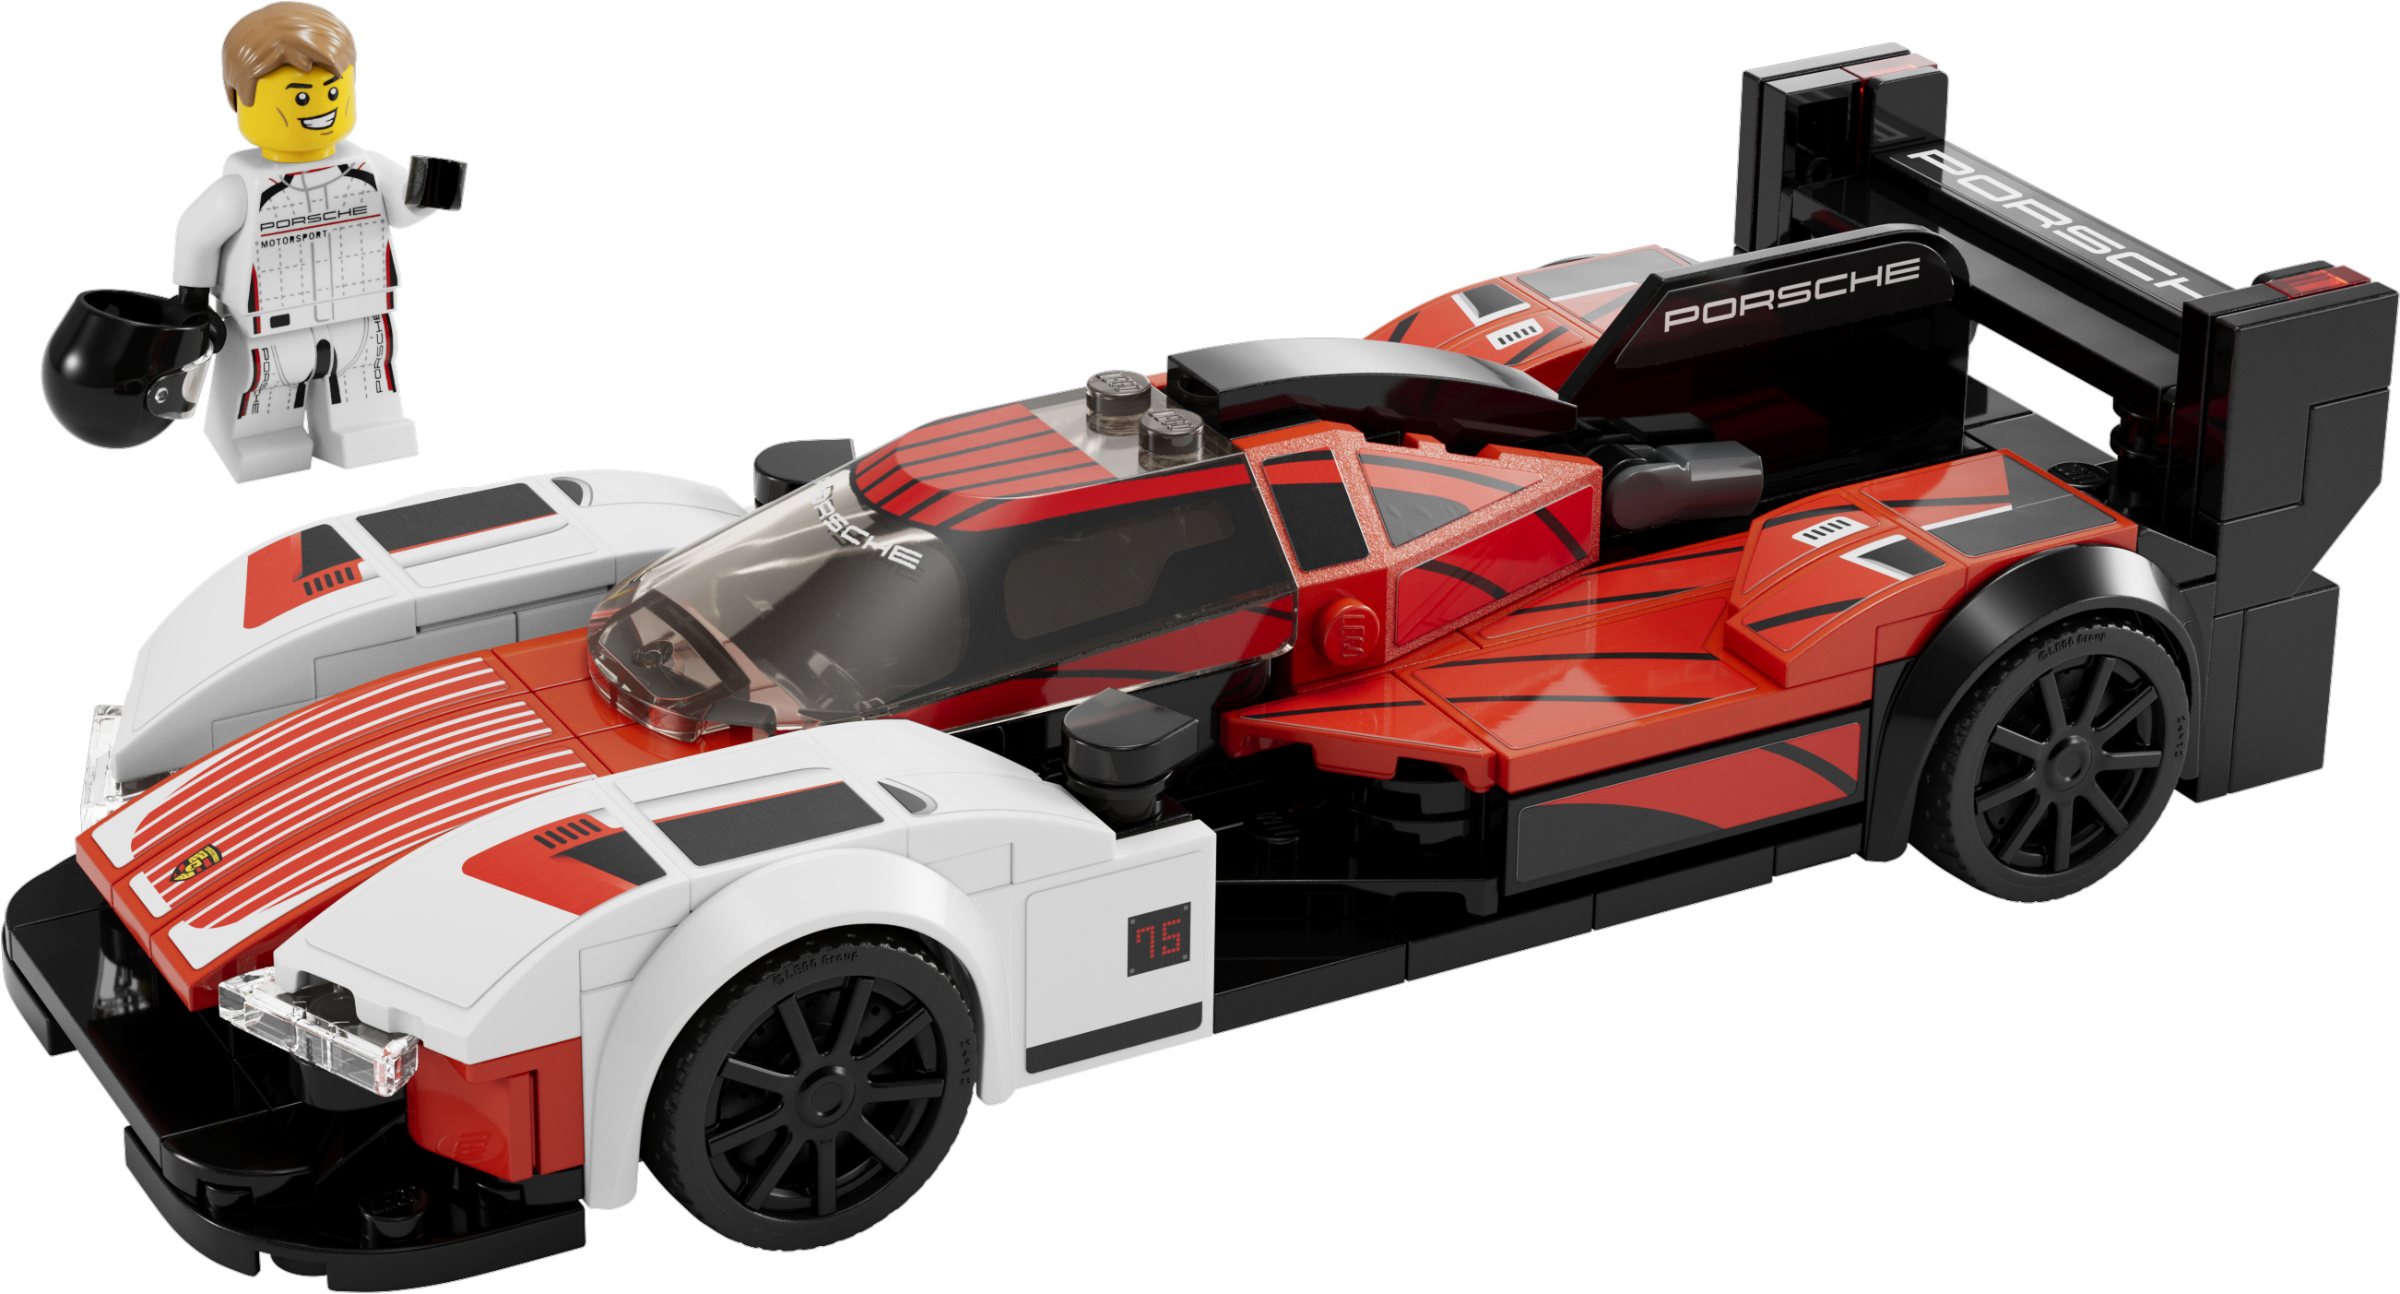 LEGO Speed Champions to add 18th manufacturer in 2023